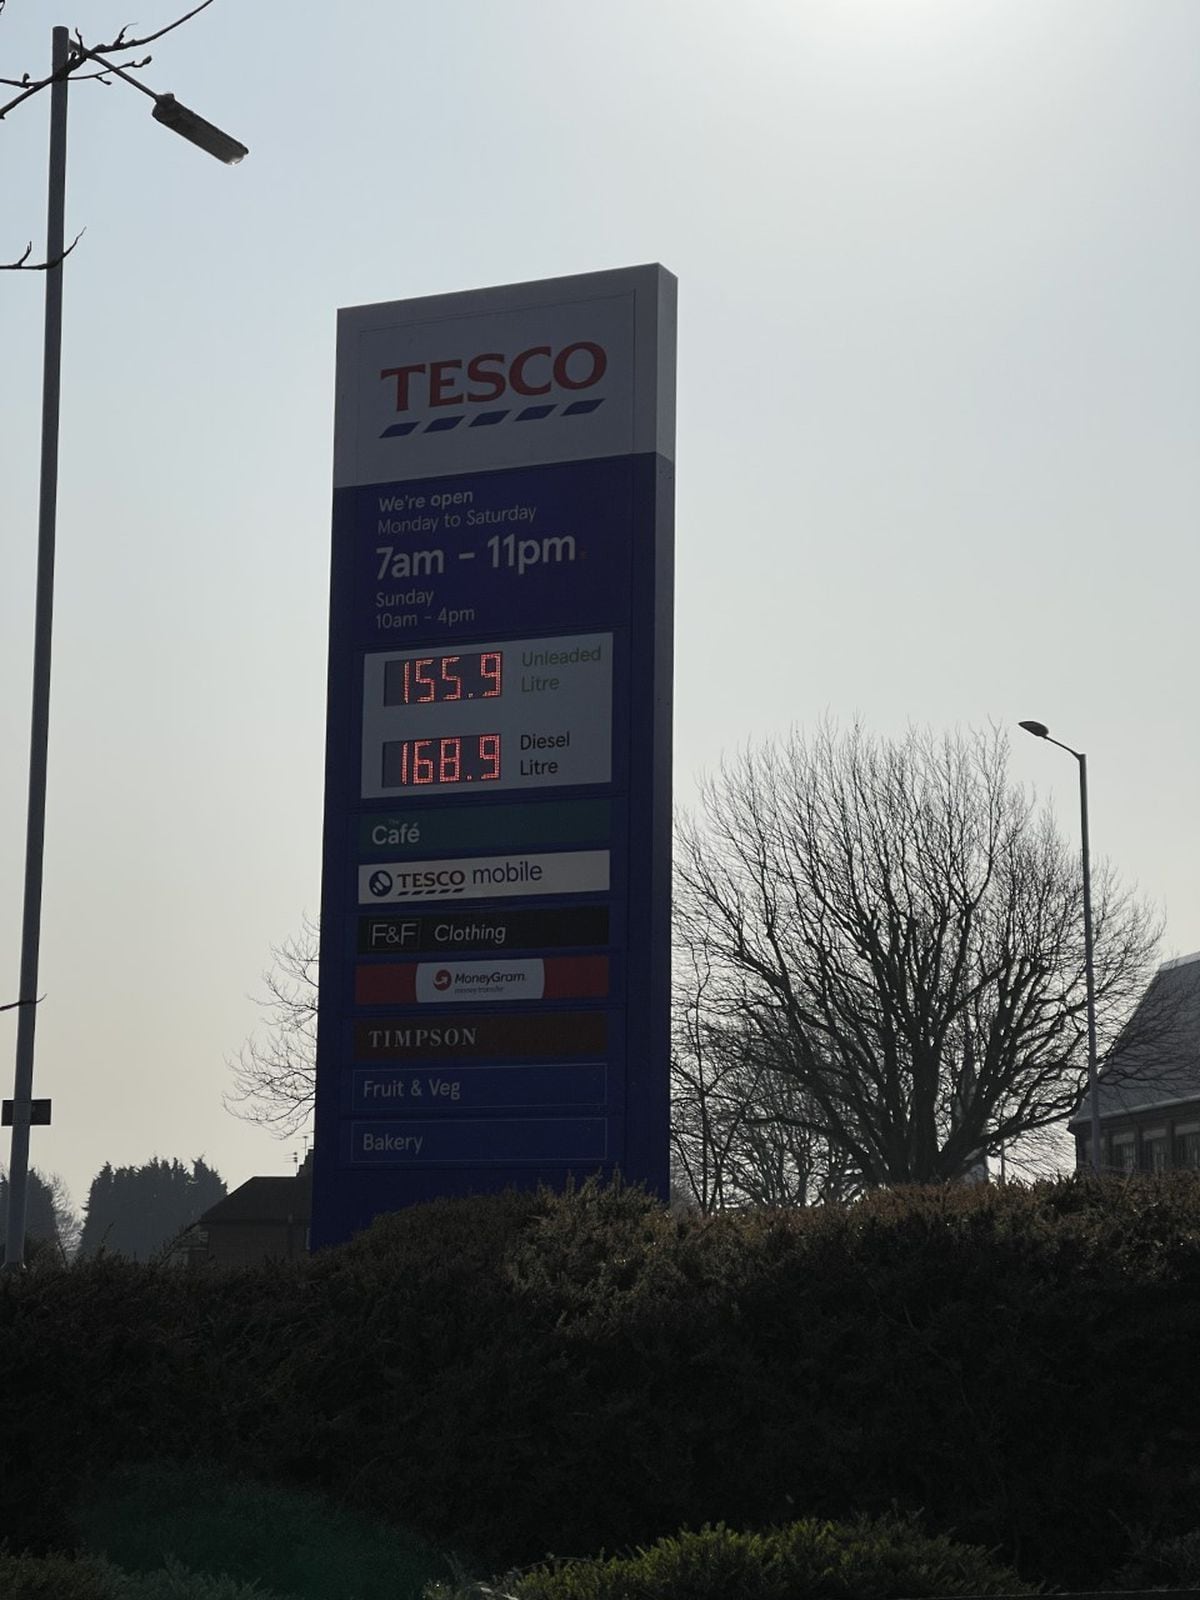 Tesco Marston Road after the 5p fuel duty cut